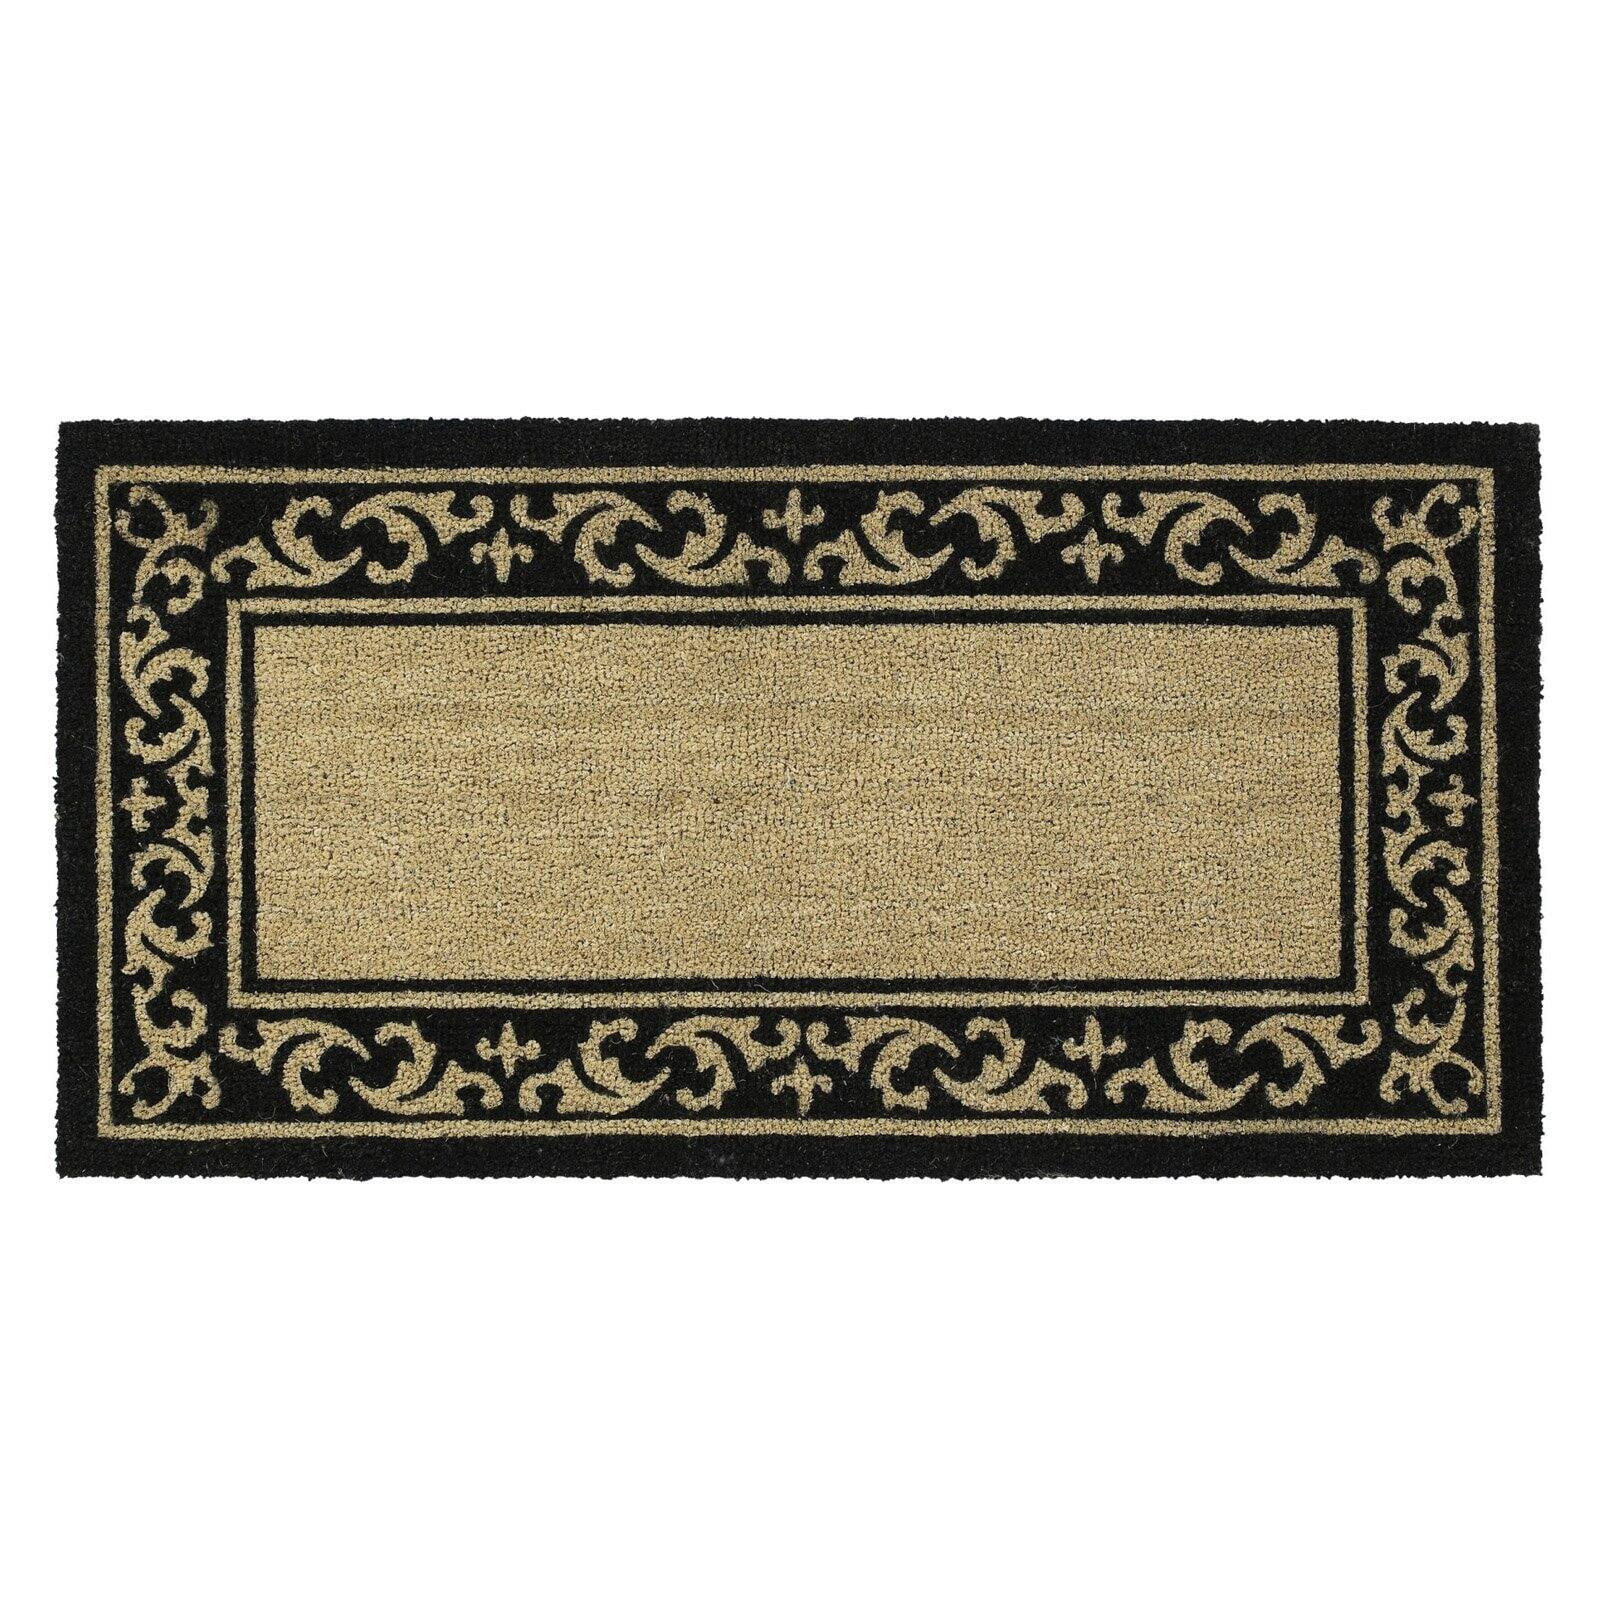 16 by 27 by 1-Inch Fabric Kempf Go Away Doormat 